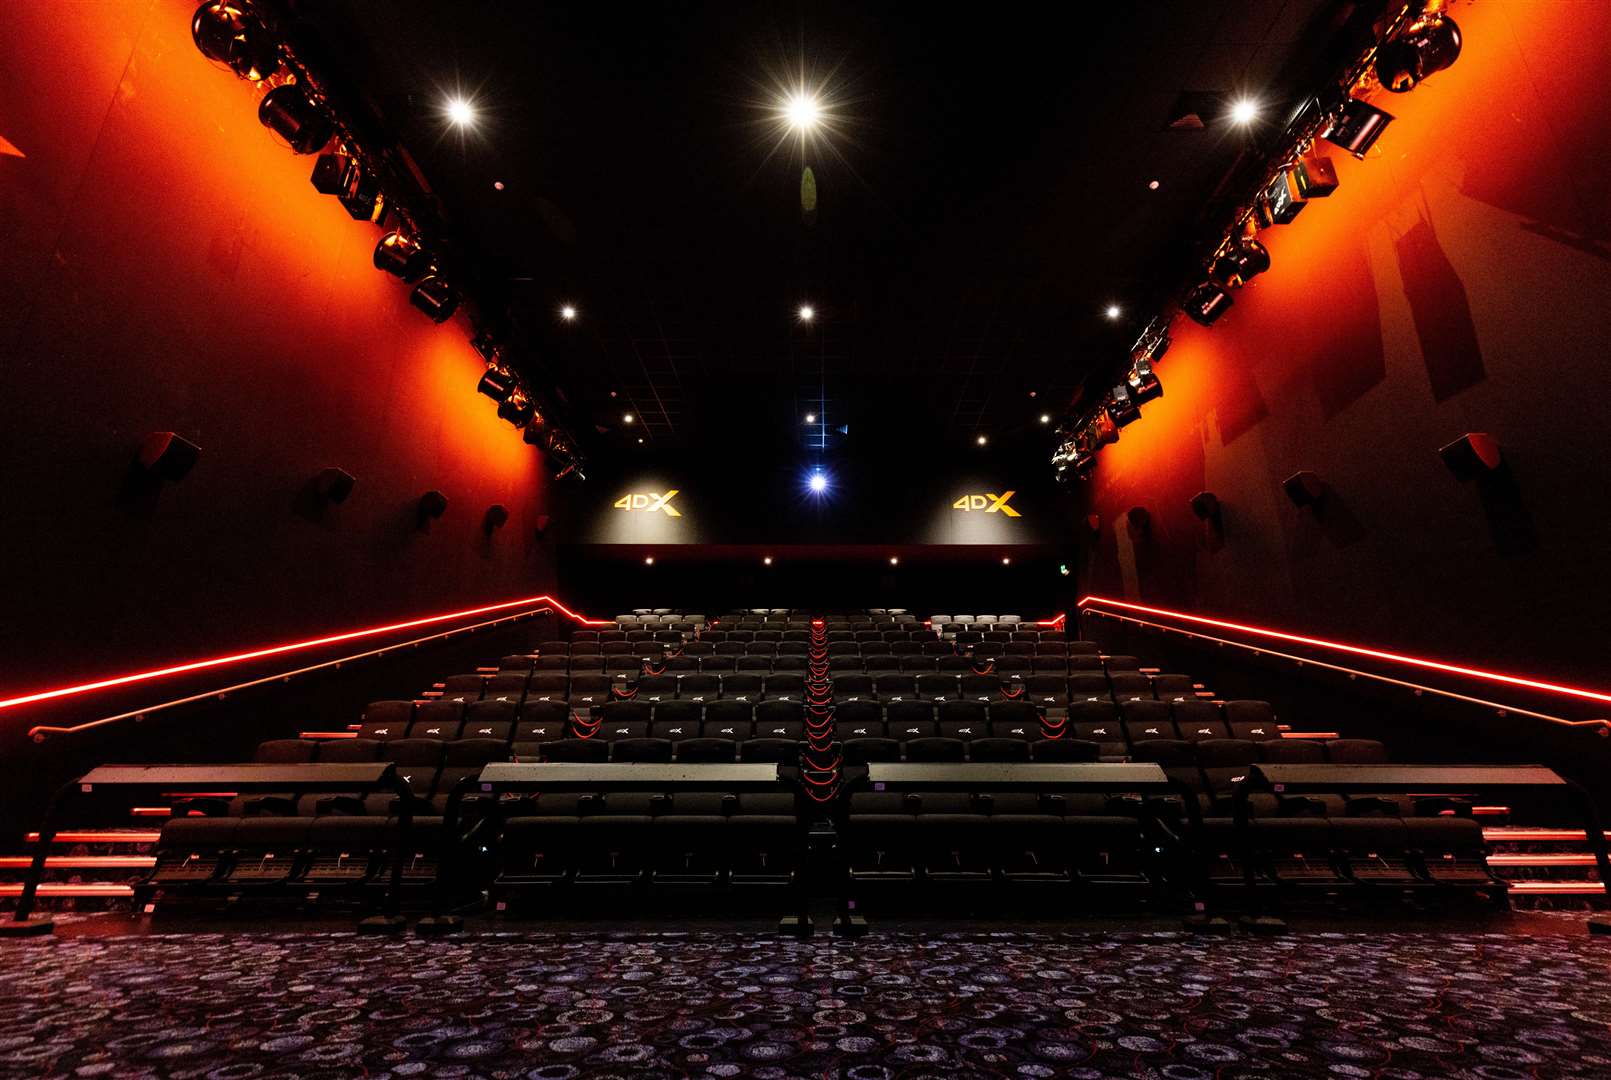 How the seats look in the 4DX theatre. Picture: Andrew Fosker/PinPep